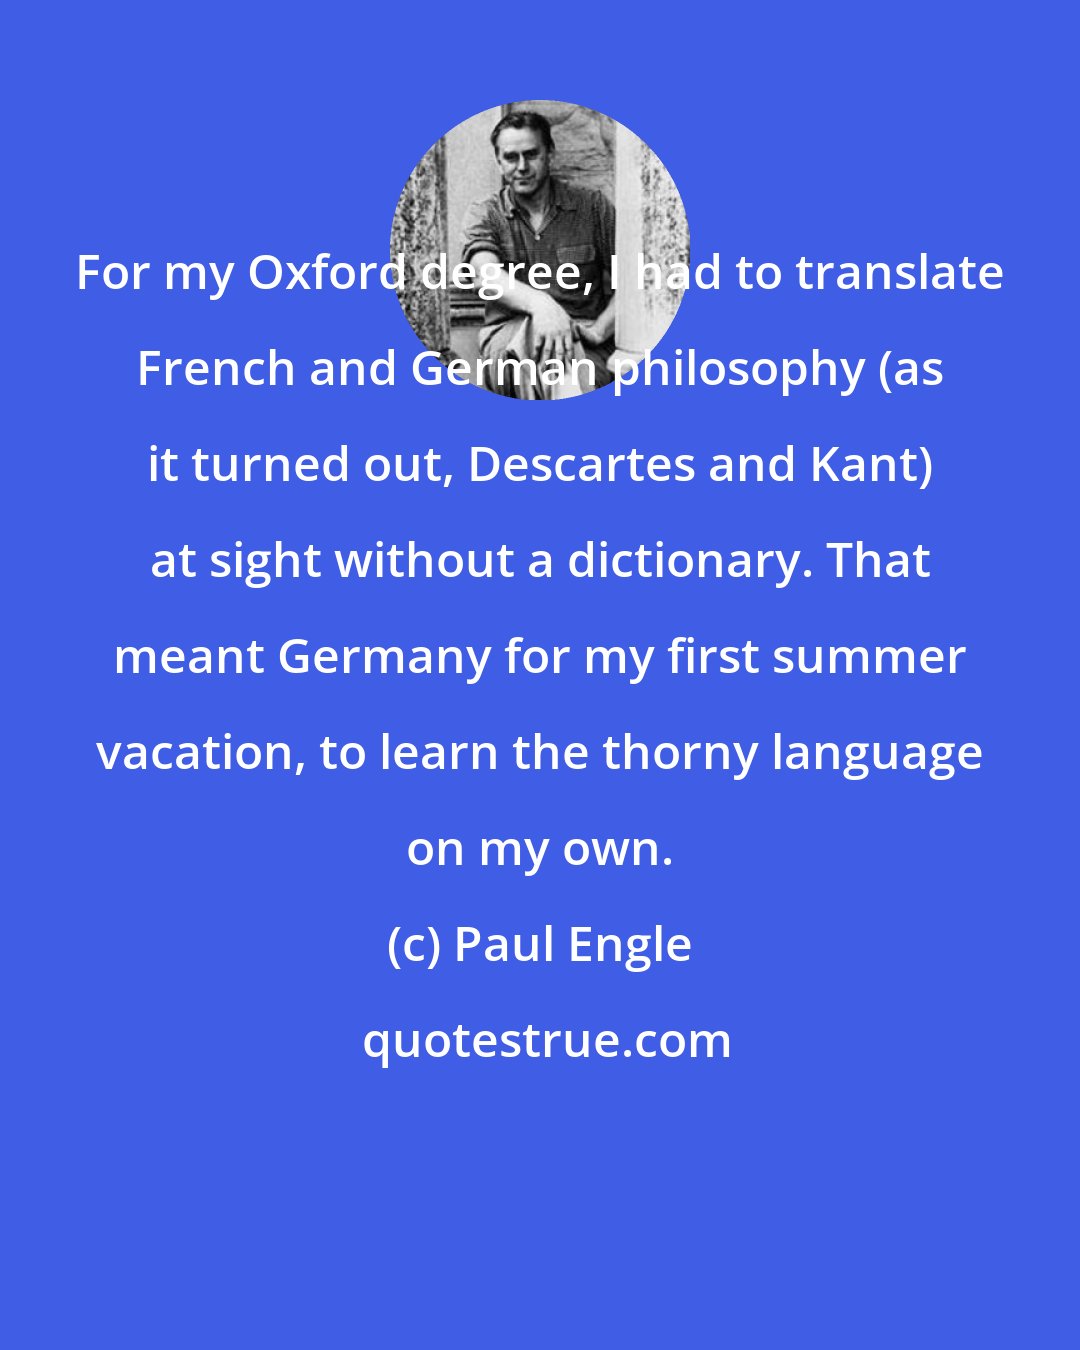 Paul Engle: For my Oxford degree, I had to translate French and German philosophy (as it turned out, Descartes and Kant) at sight without a dictionary. That meant Germany for my first summer vacation, to learn the thorny language on my own.